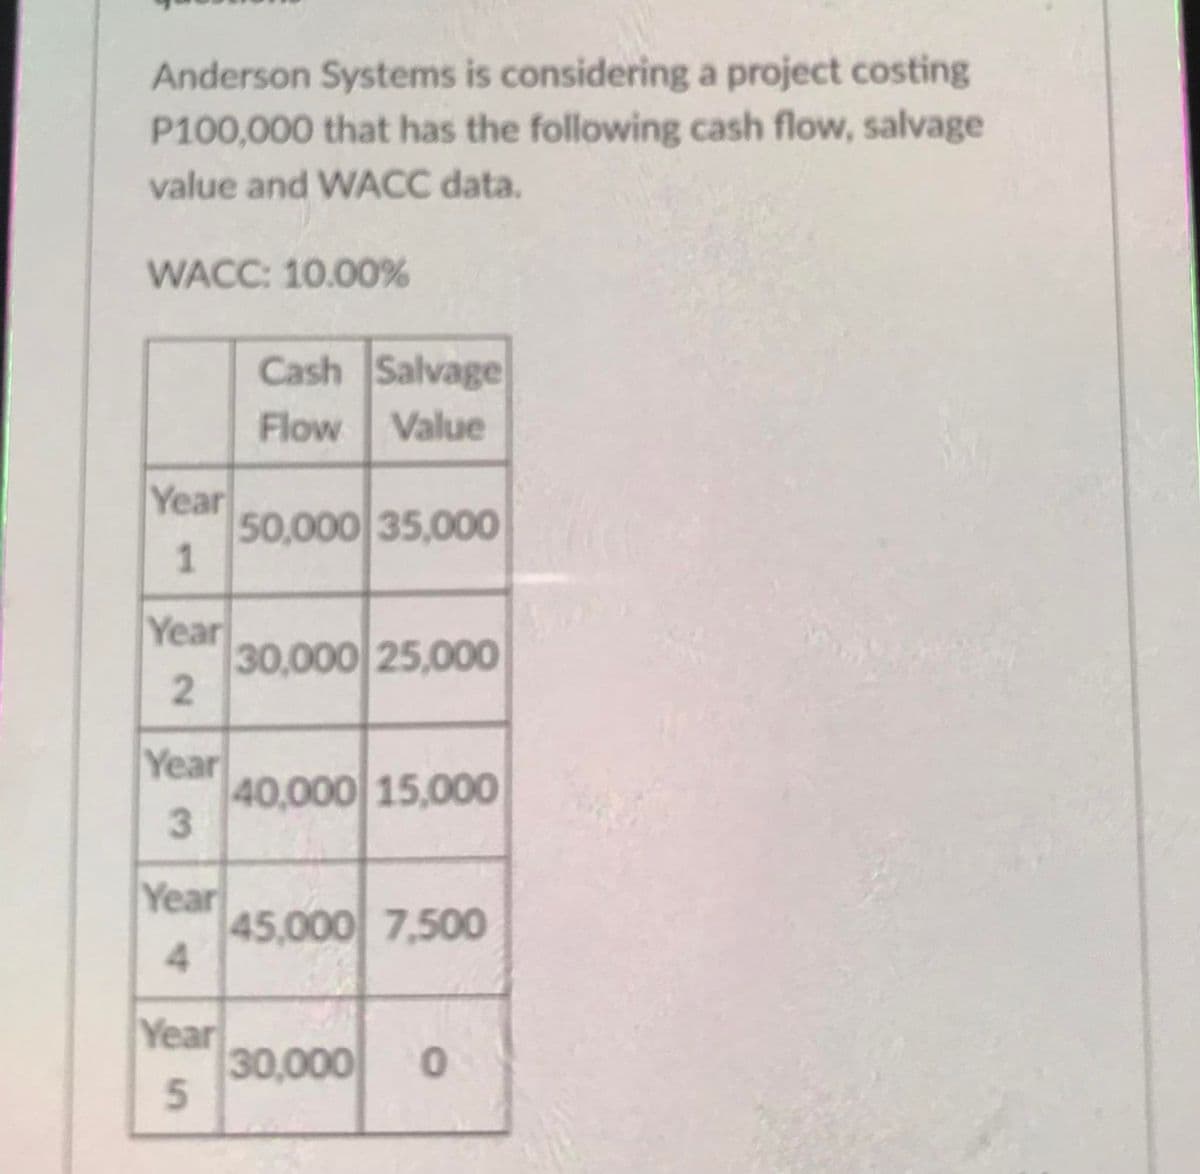 Anderson Systems is considering a project costing
P100,000 that has the following cash flow, salvage
value and WACC data.
WACC: 10.00%
Cash Salvage
Flow Value
Year
50,000 35,000
Year
30,000 25,000
Year
40,000 15,000
Year
45,000 7,500
4.
Year
30,000
5.
1.
2.
